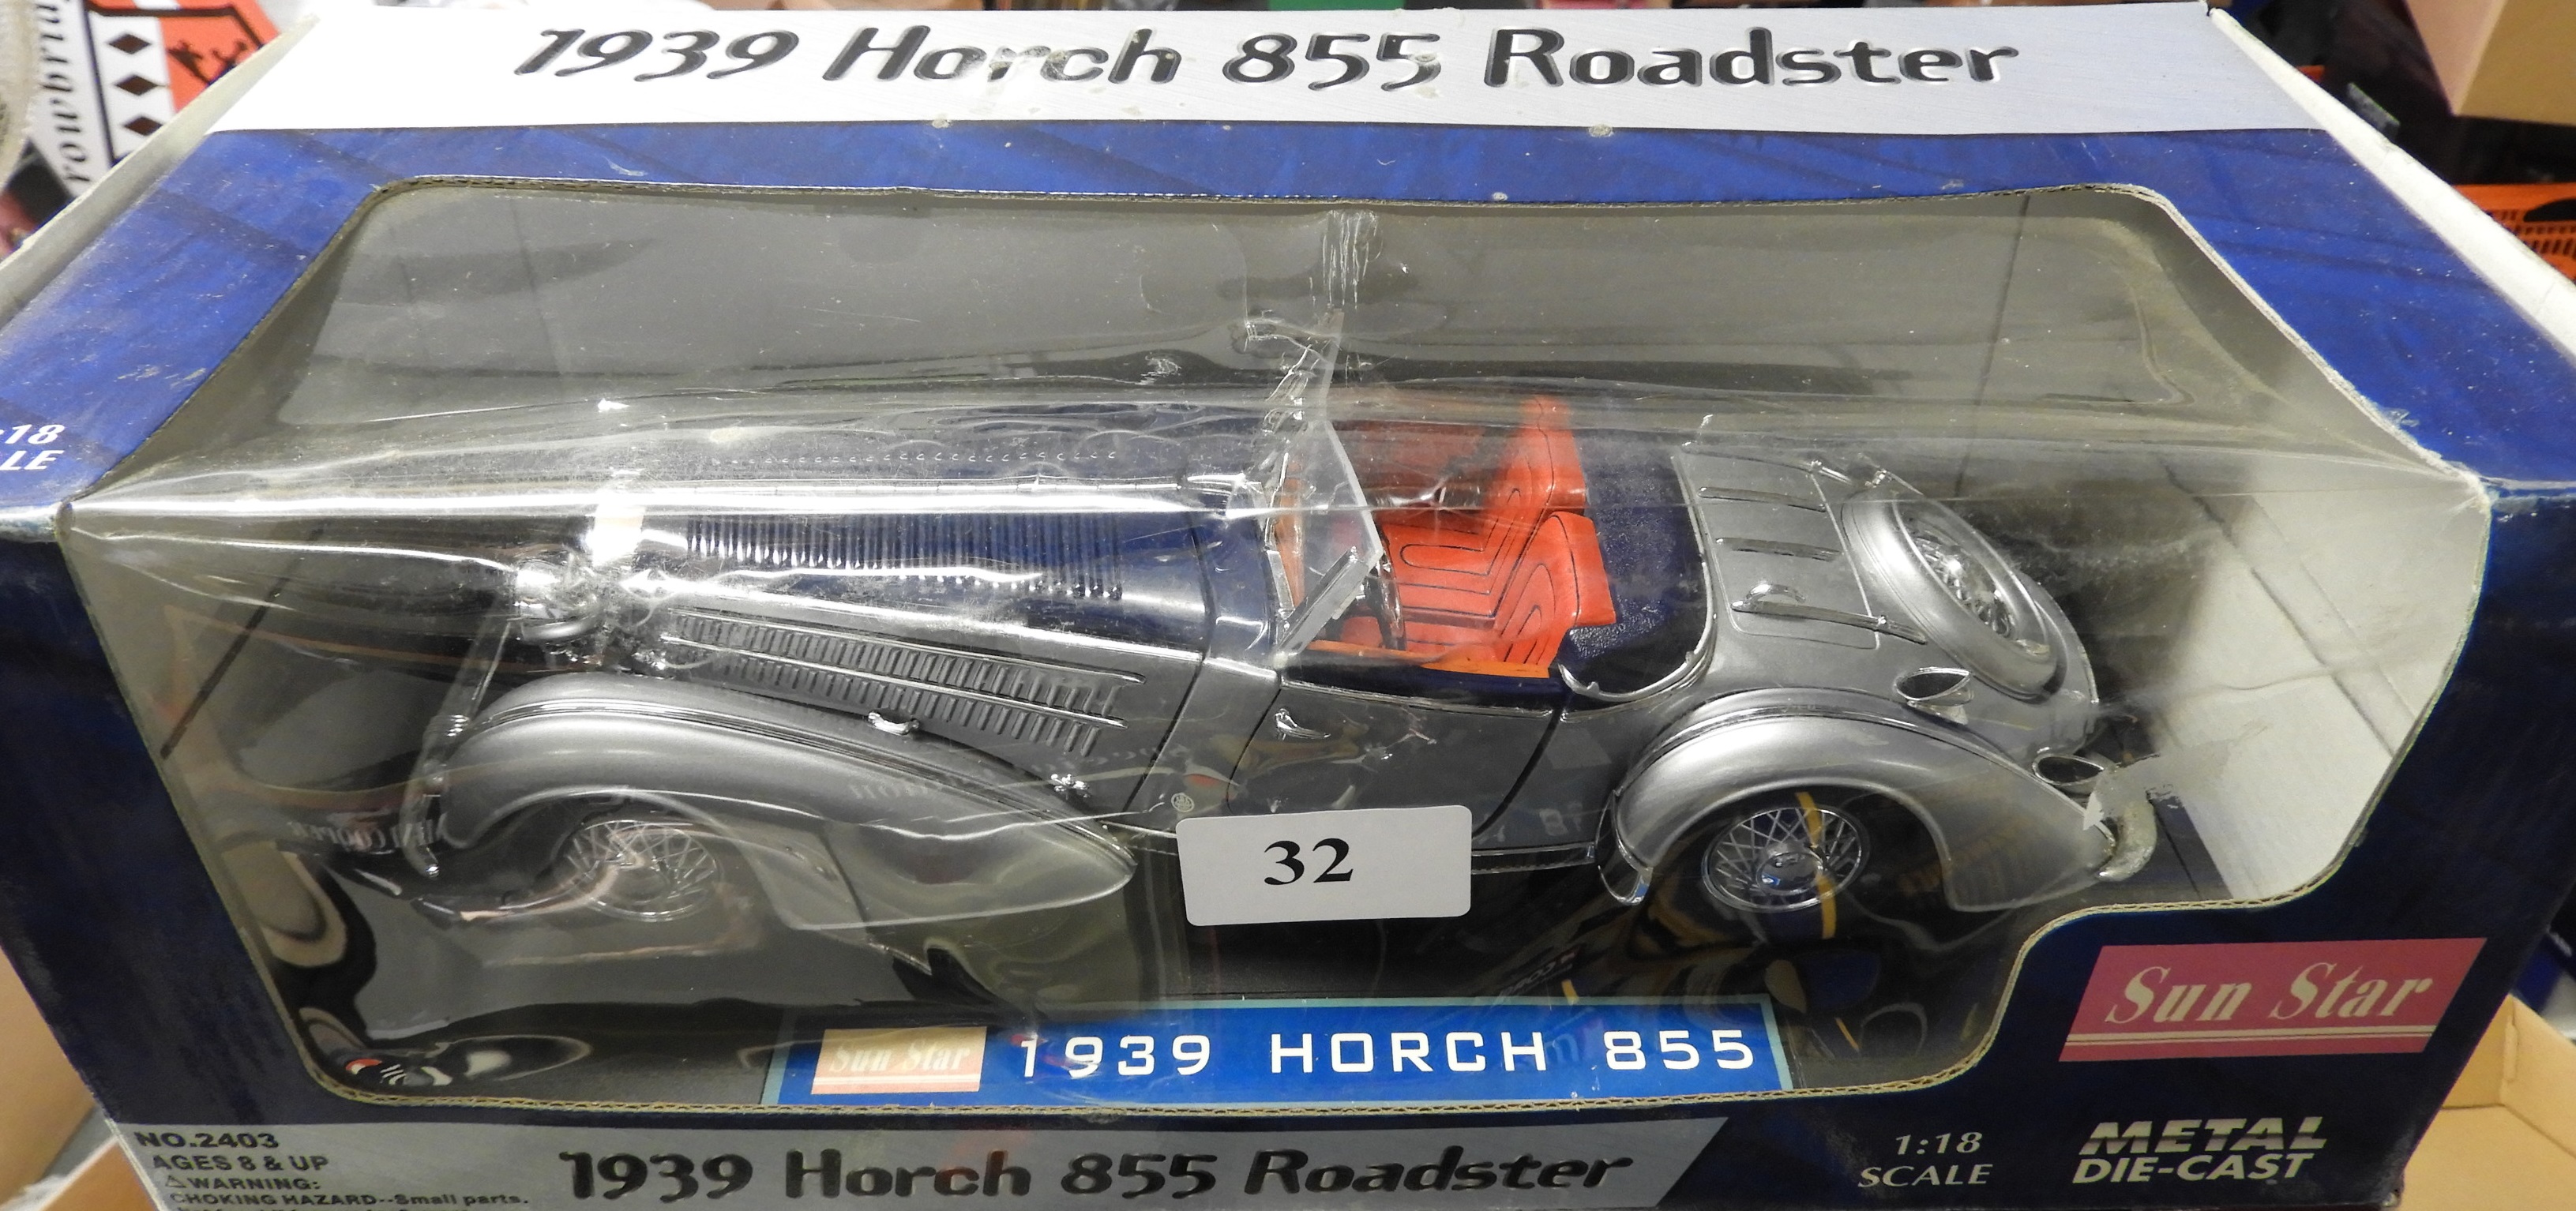 SUN STAR 1:18 DIECAST 1939 HORCH 855 ROADSTER (BOXED)